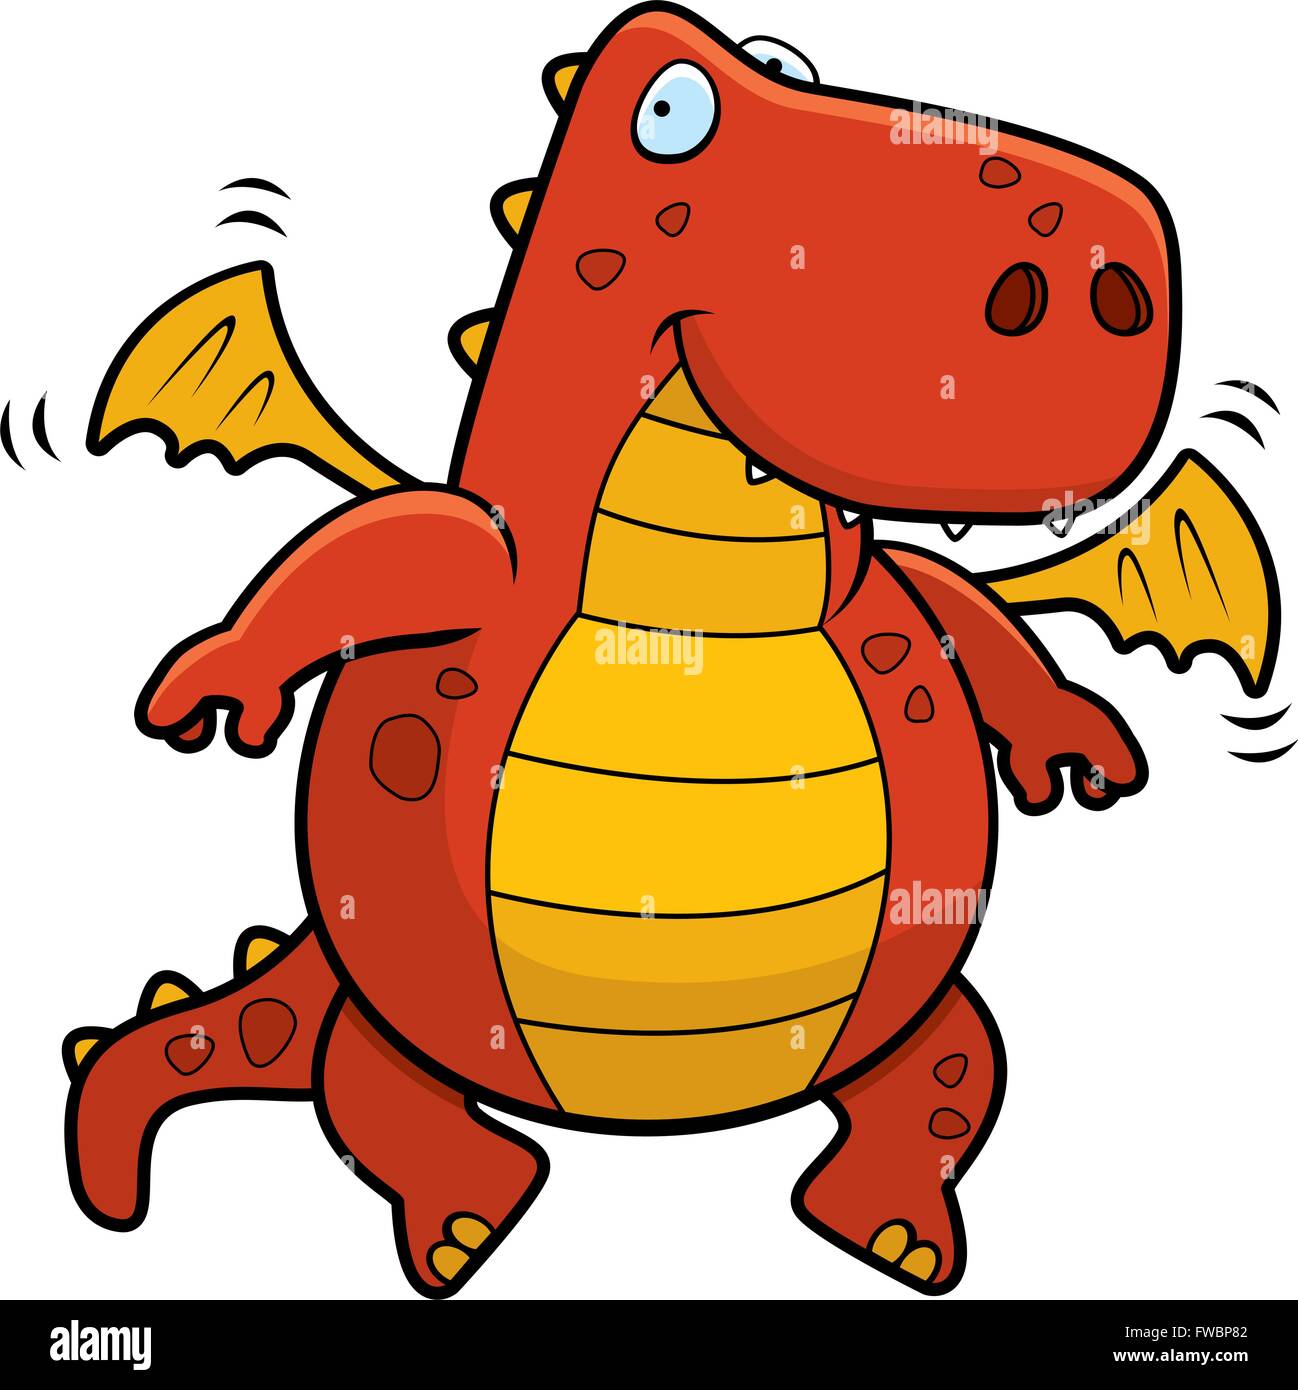 A happy cartoon dragon flying and smiling. Stock Vector